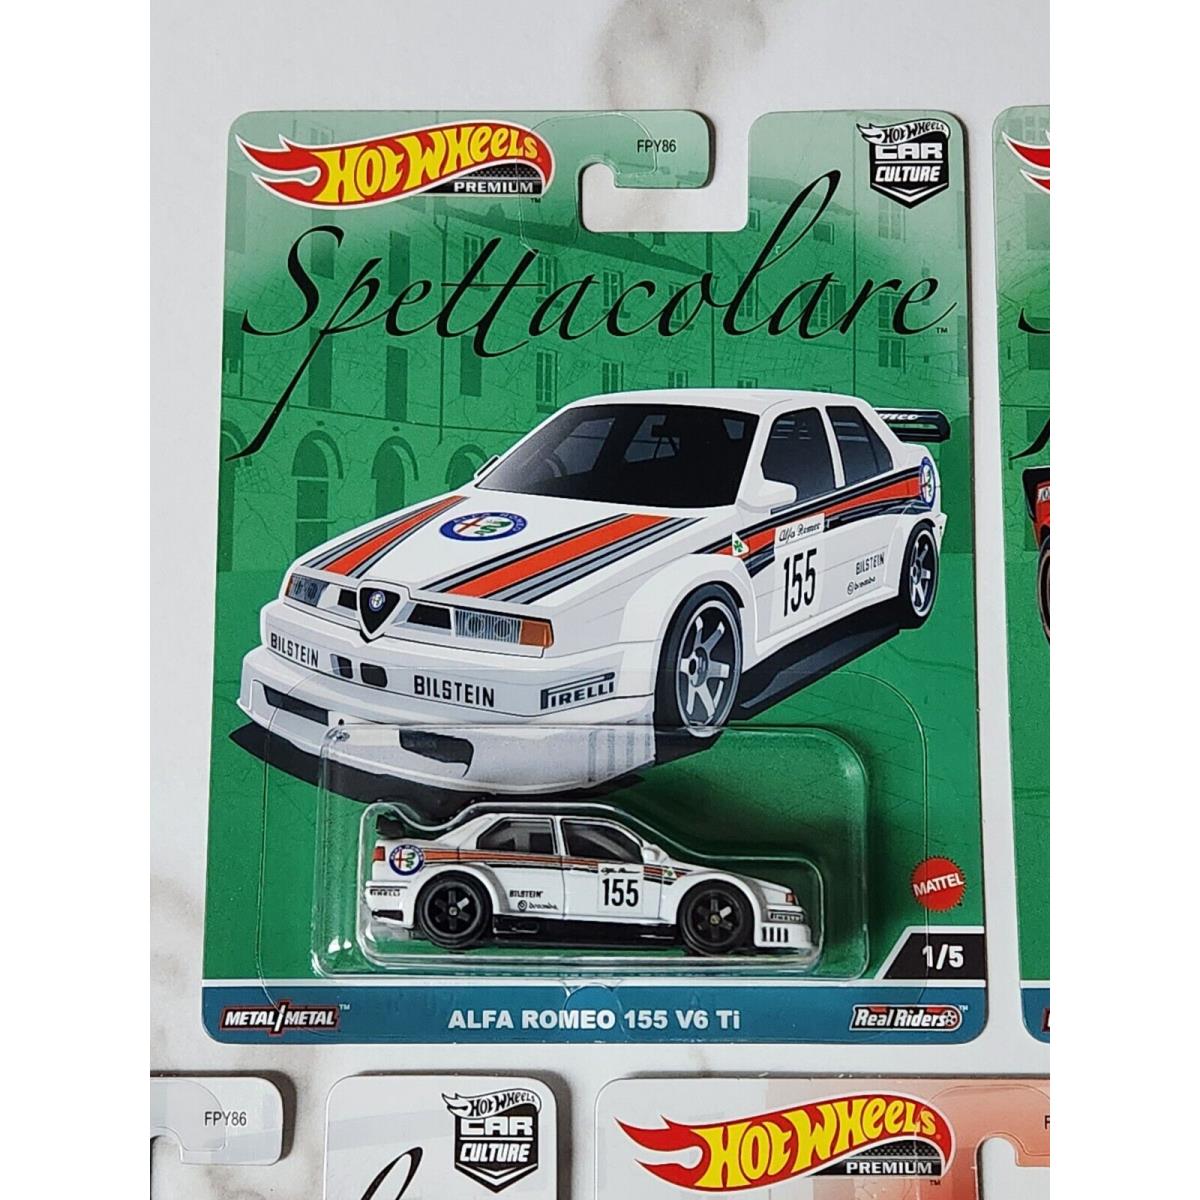 2023 Hot Wheels Car Culture Spettacolare 1/64 Complete Set Of 5